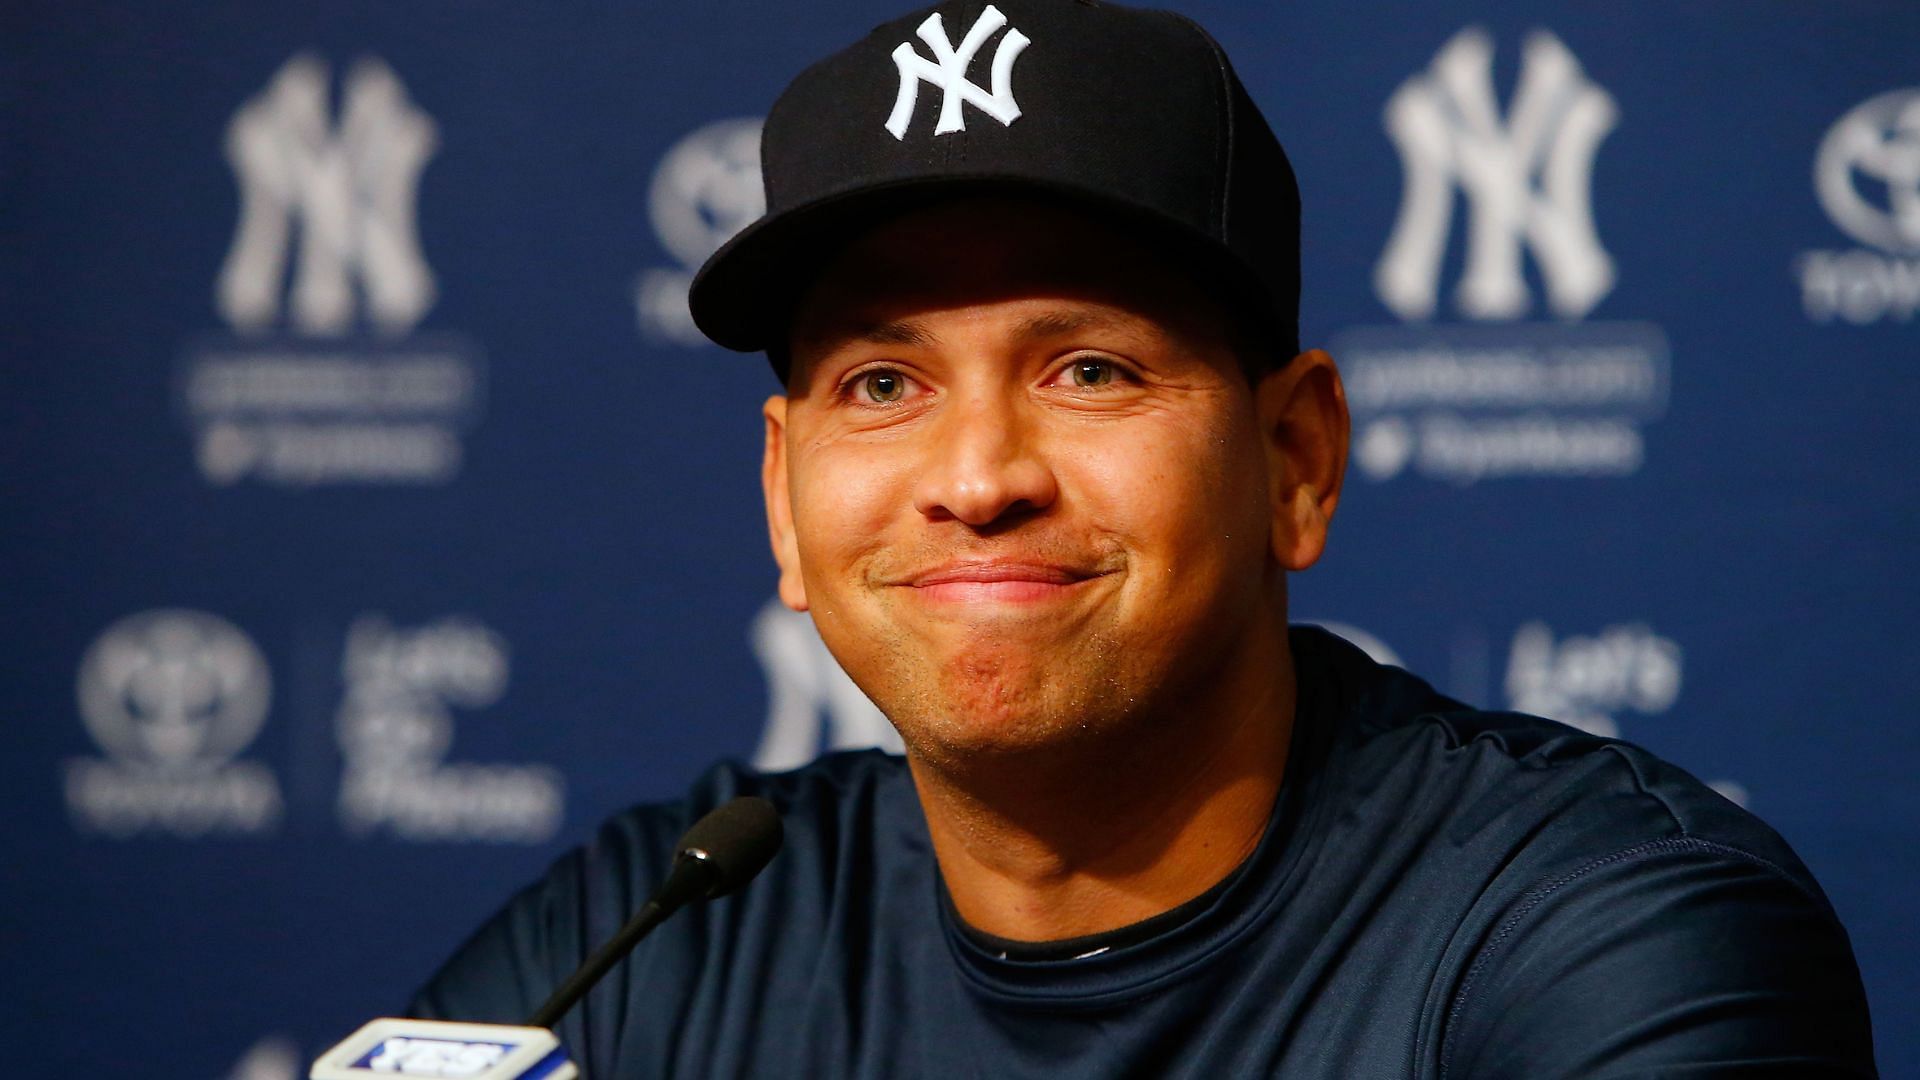 Alex Rodriguez speaks during a news conference on August 7, 2016 at Yankee Stadium